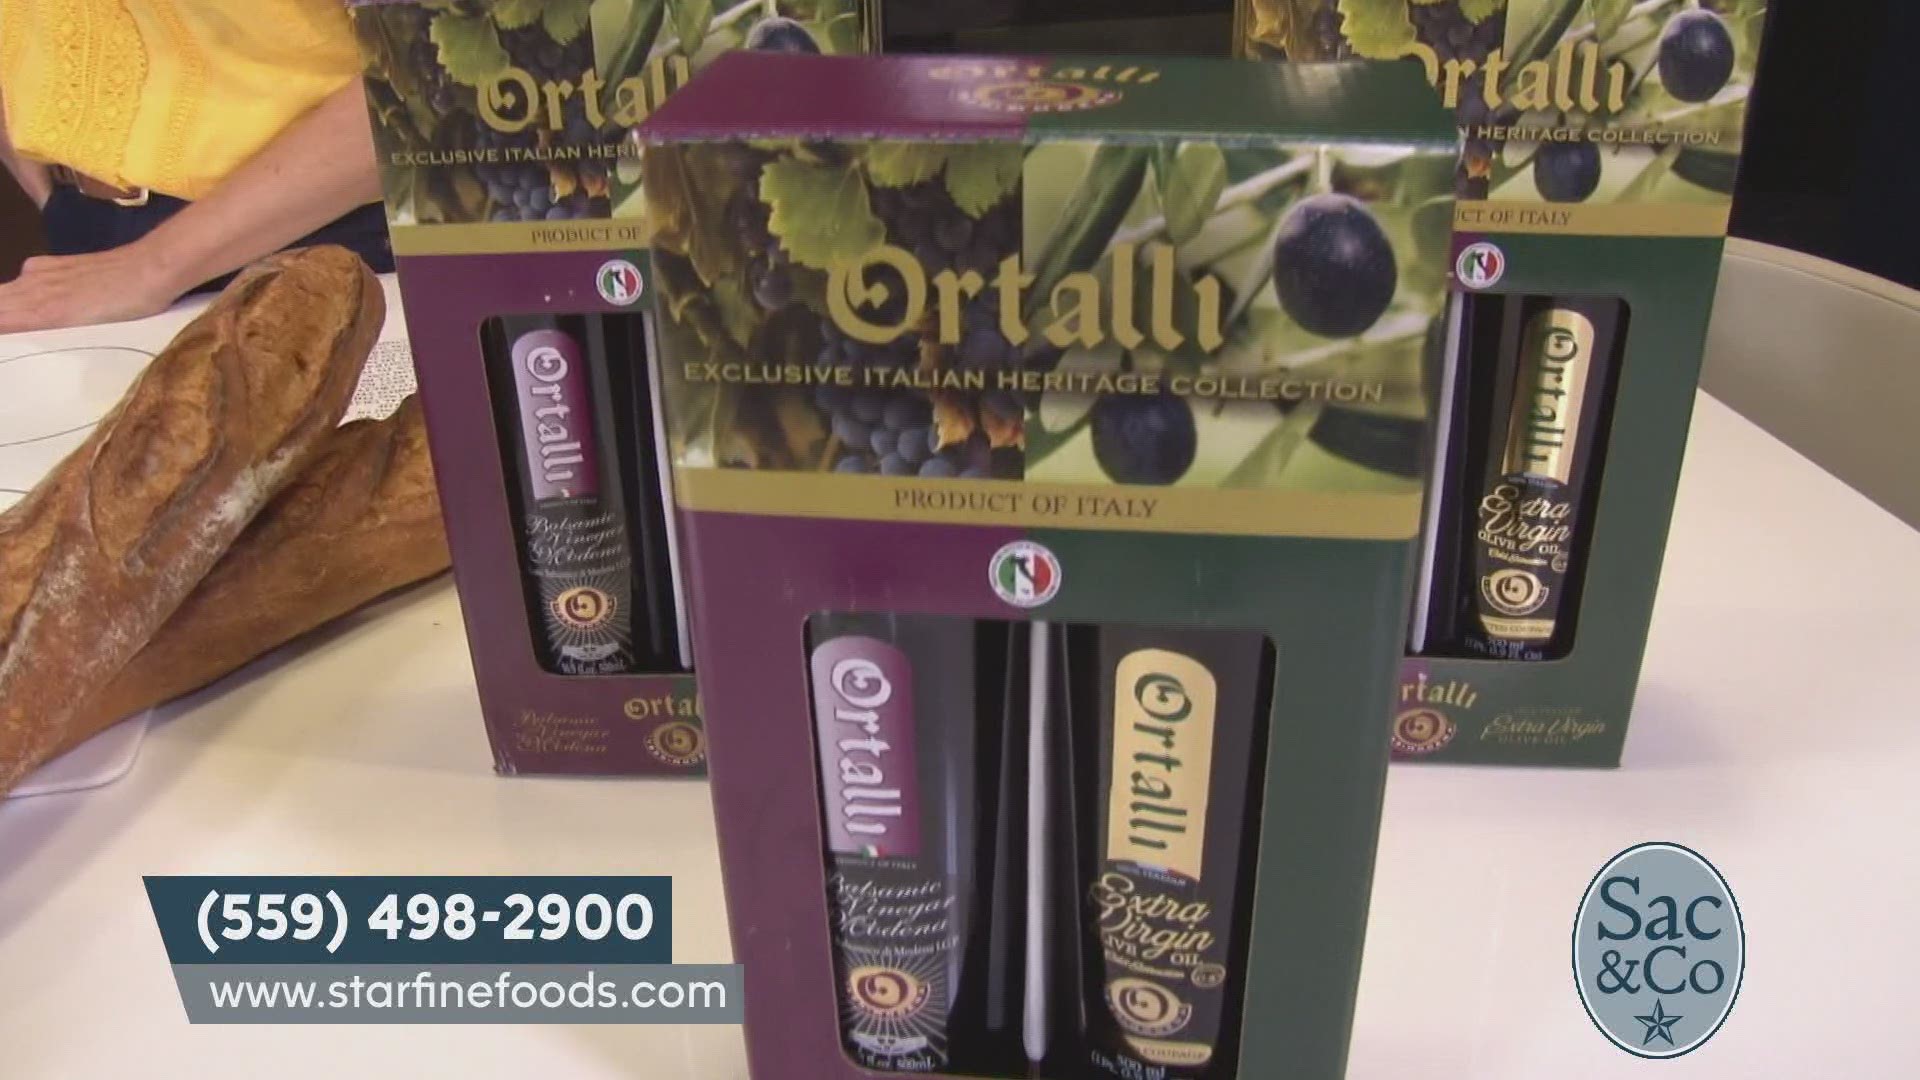 Tracy Sellers chats with Emma Owens about how STAR Olive Oil has the most highly recommended products from the world’s trusted experts in Mediterranean foods. The following is a paid segment sponsored by STAR Olive Oil.